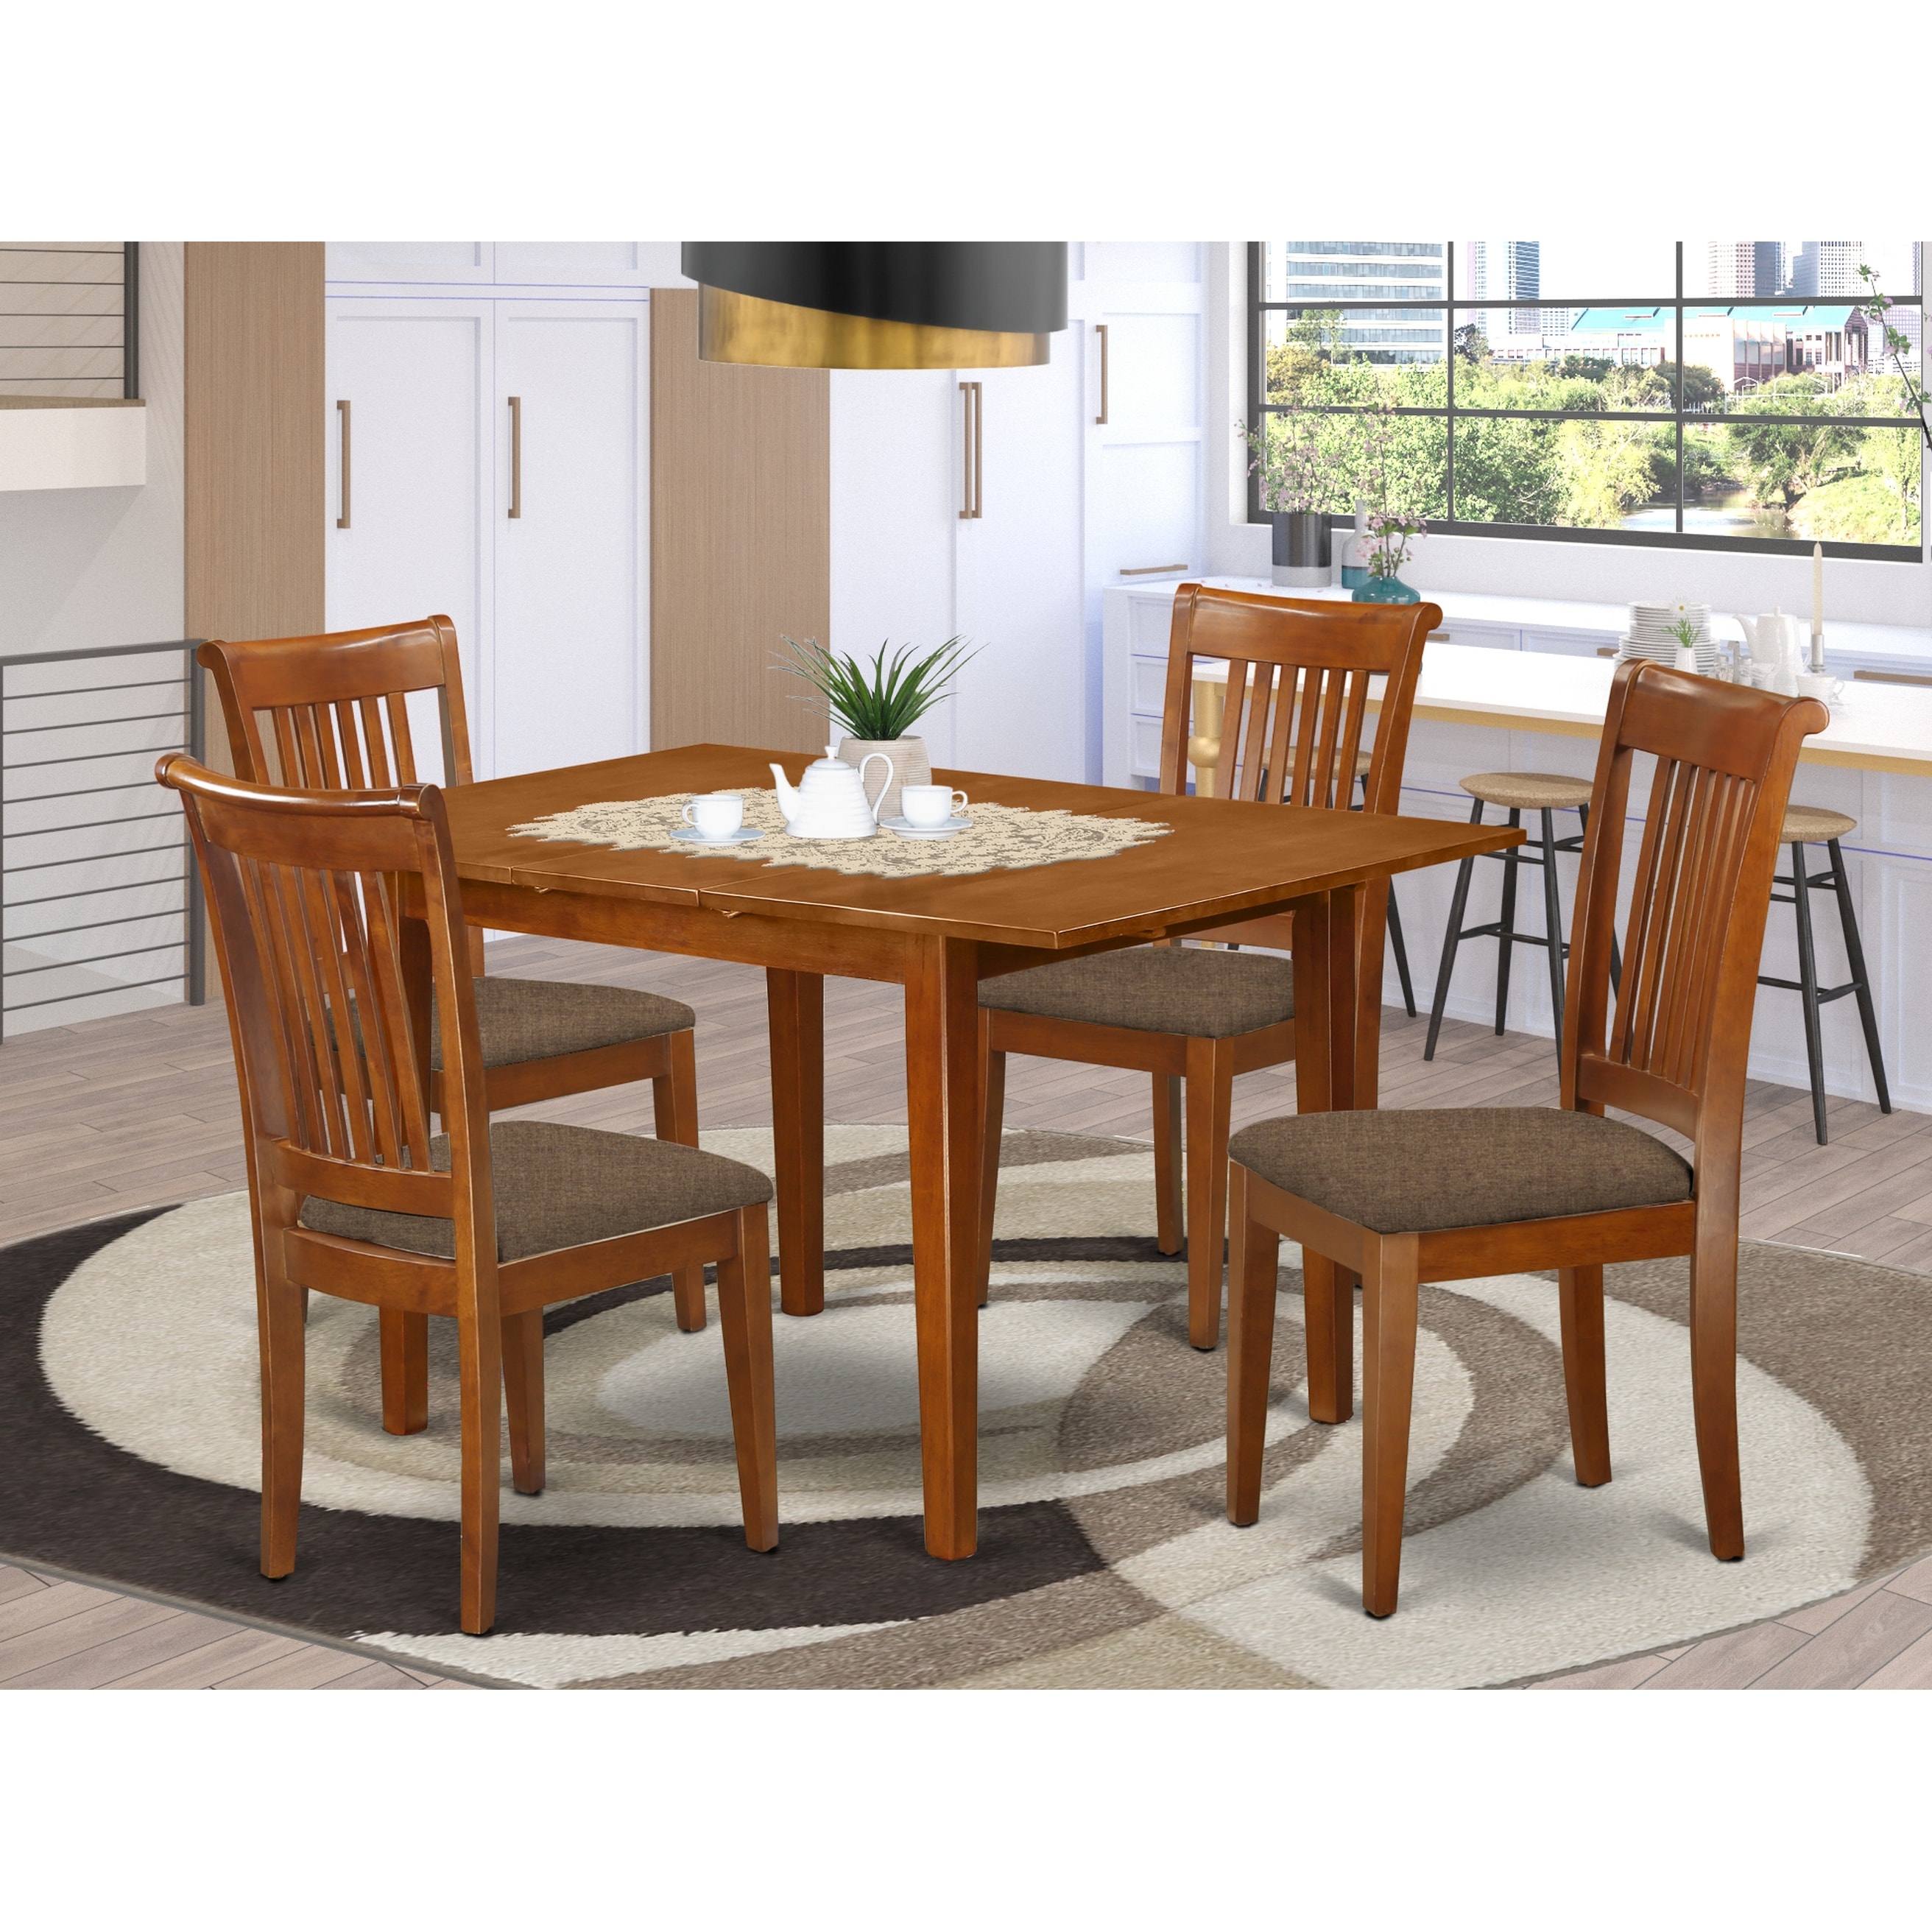 5 Piece Dinette Set Small Dining Table And 4 Chairs Overstock 10319831